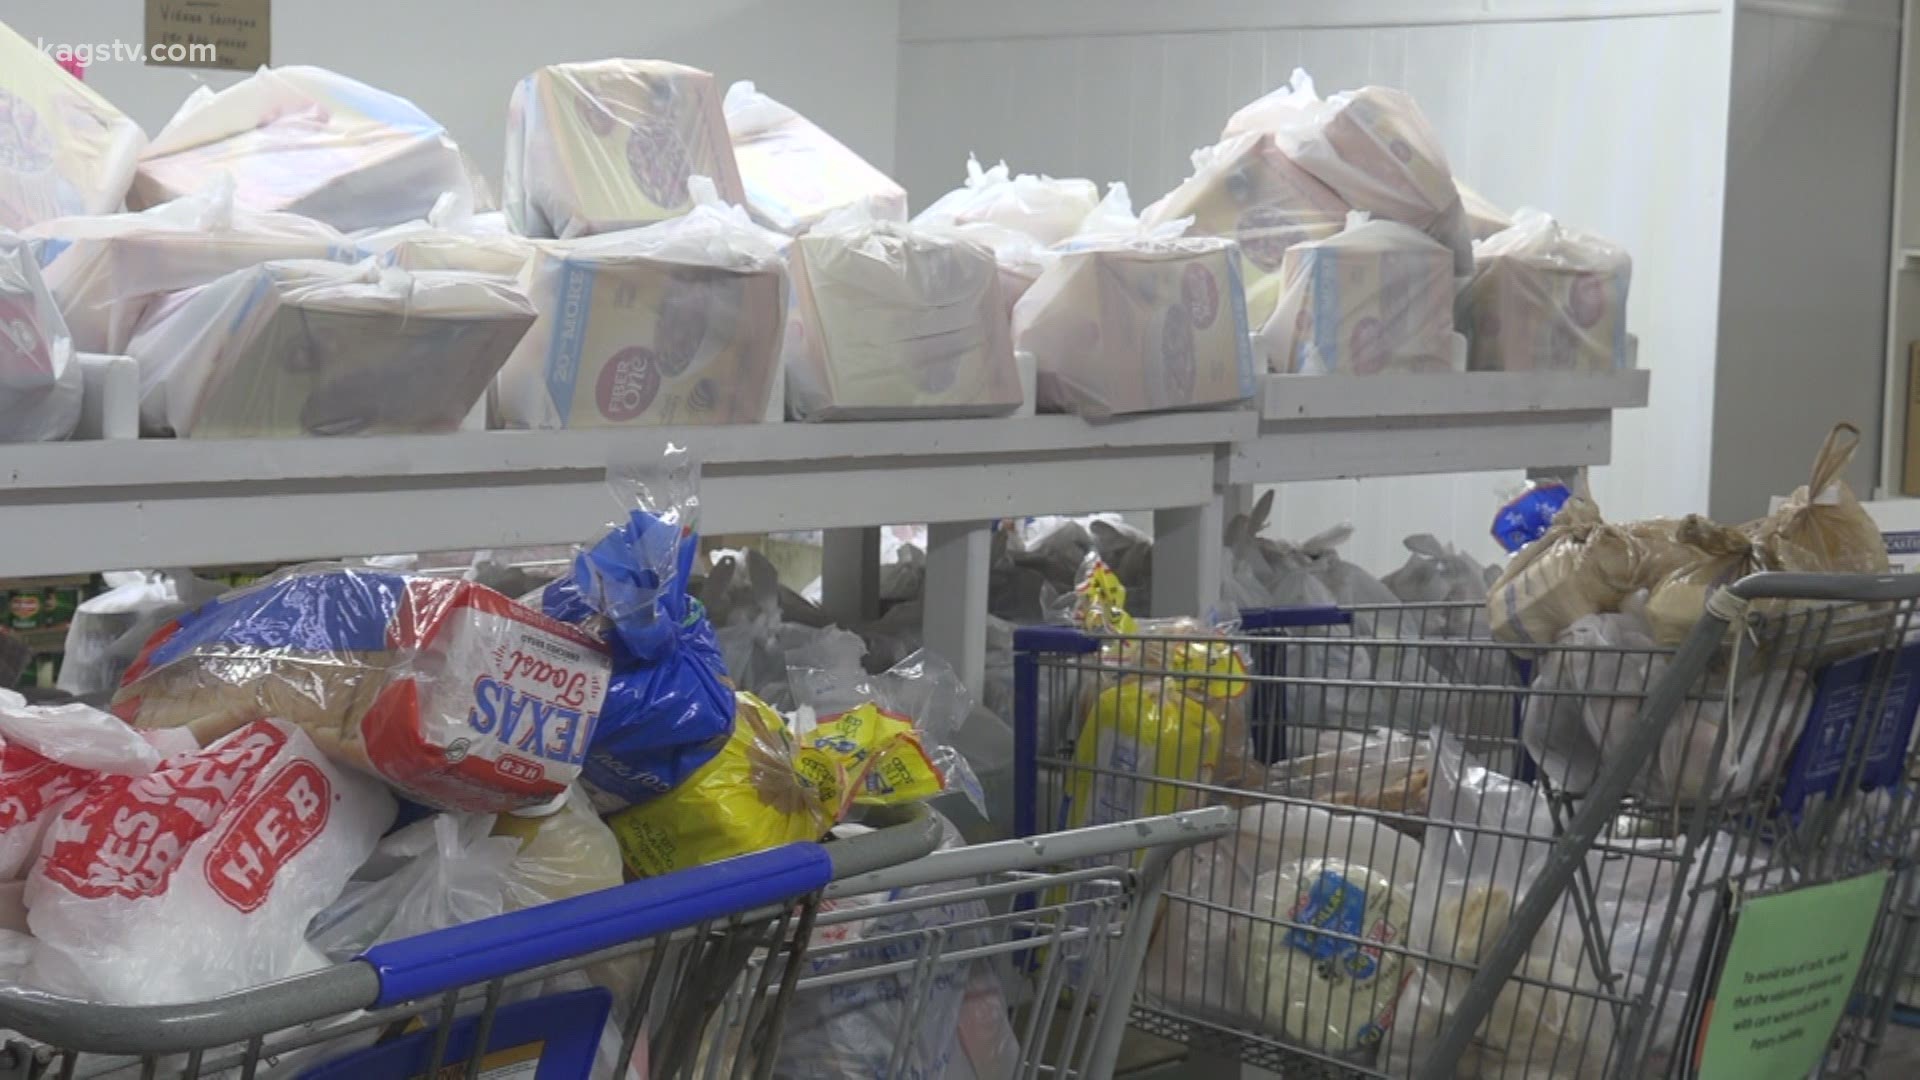 As the pandemic continues, food pantries in Brazos County are seeing more people in need